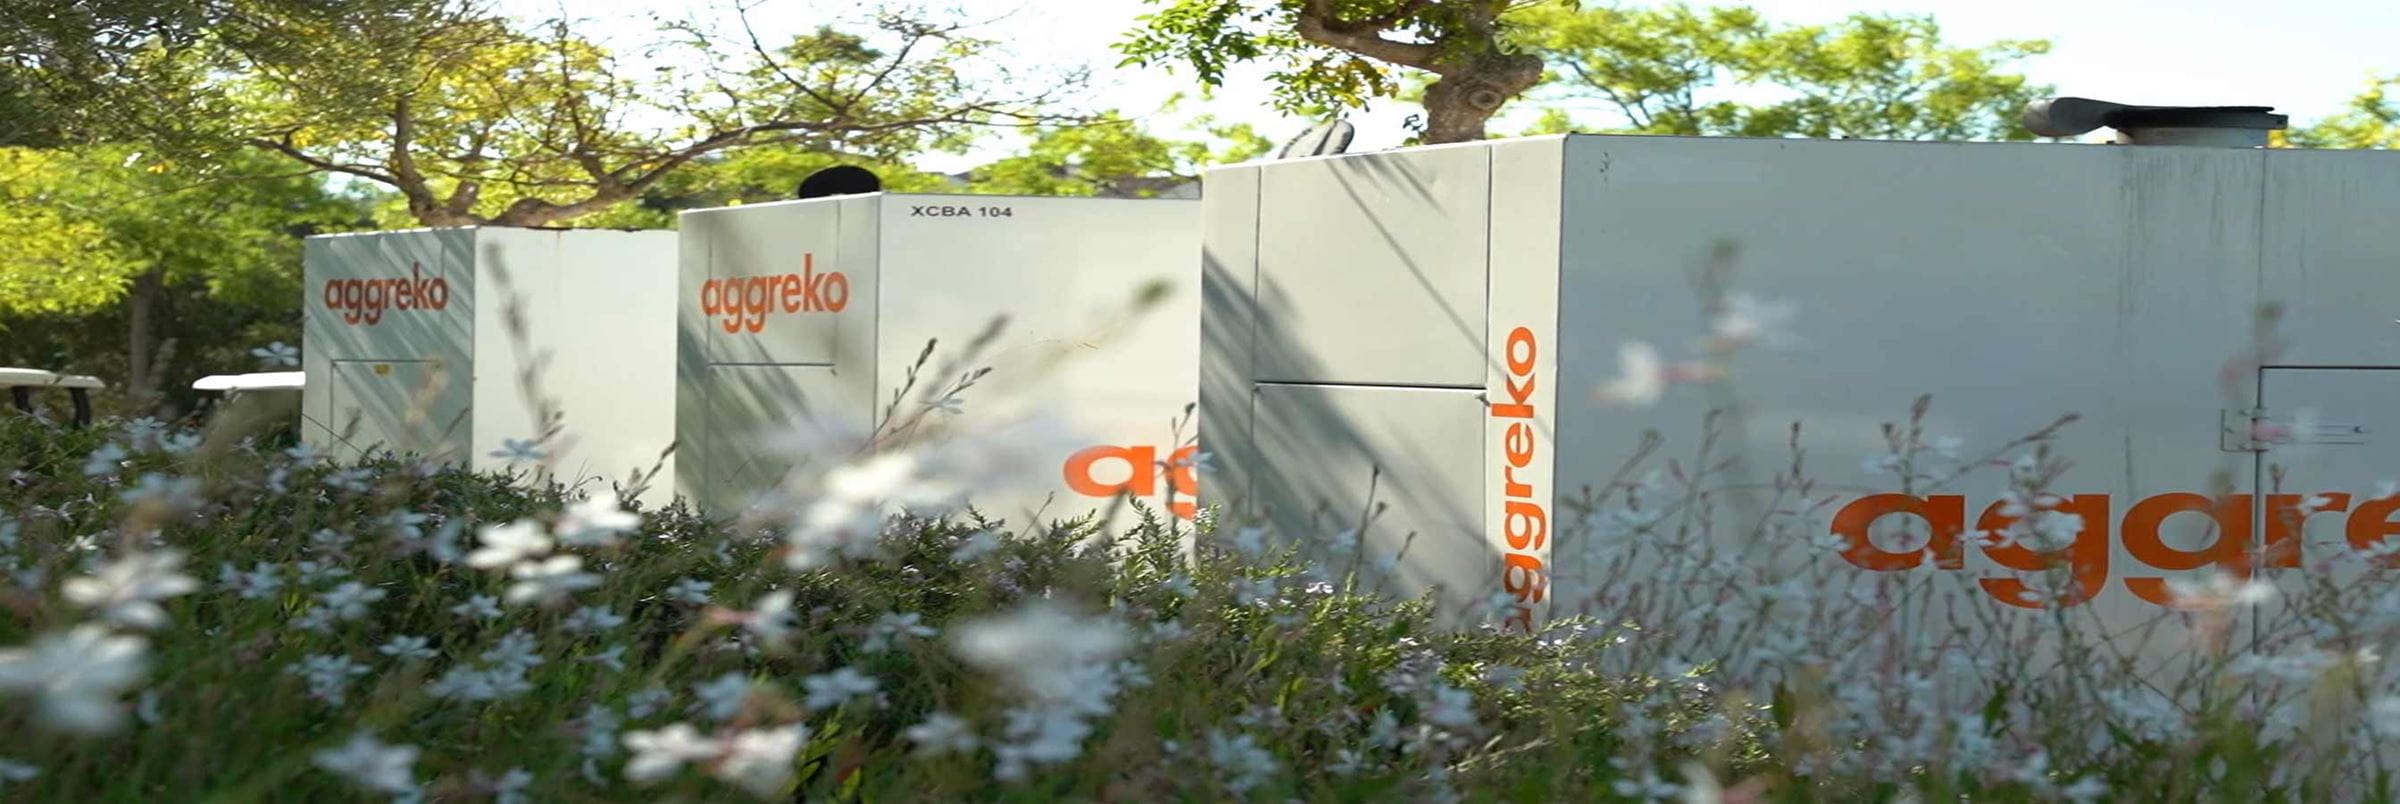 A row of Aggreko equipment and in front of them is a floral bush of some desciption.